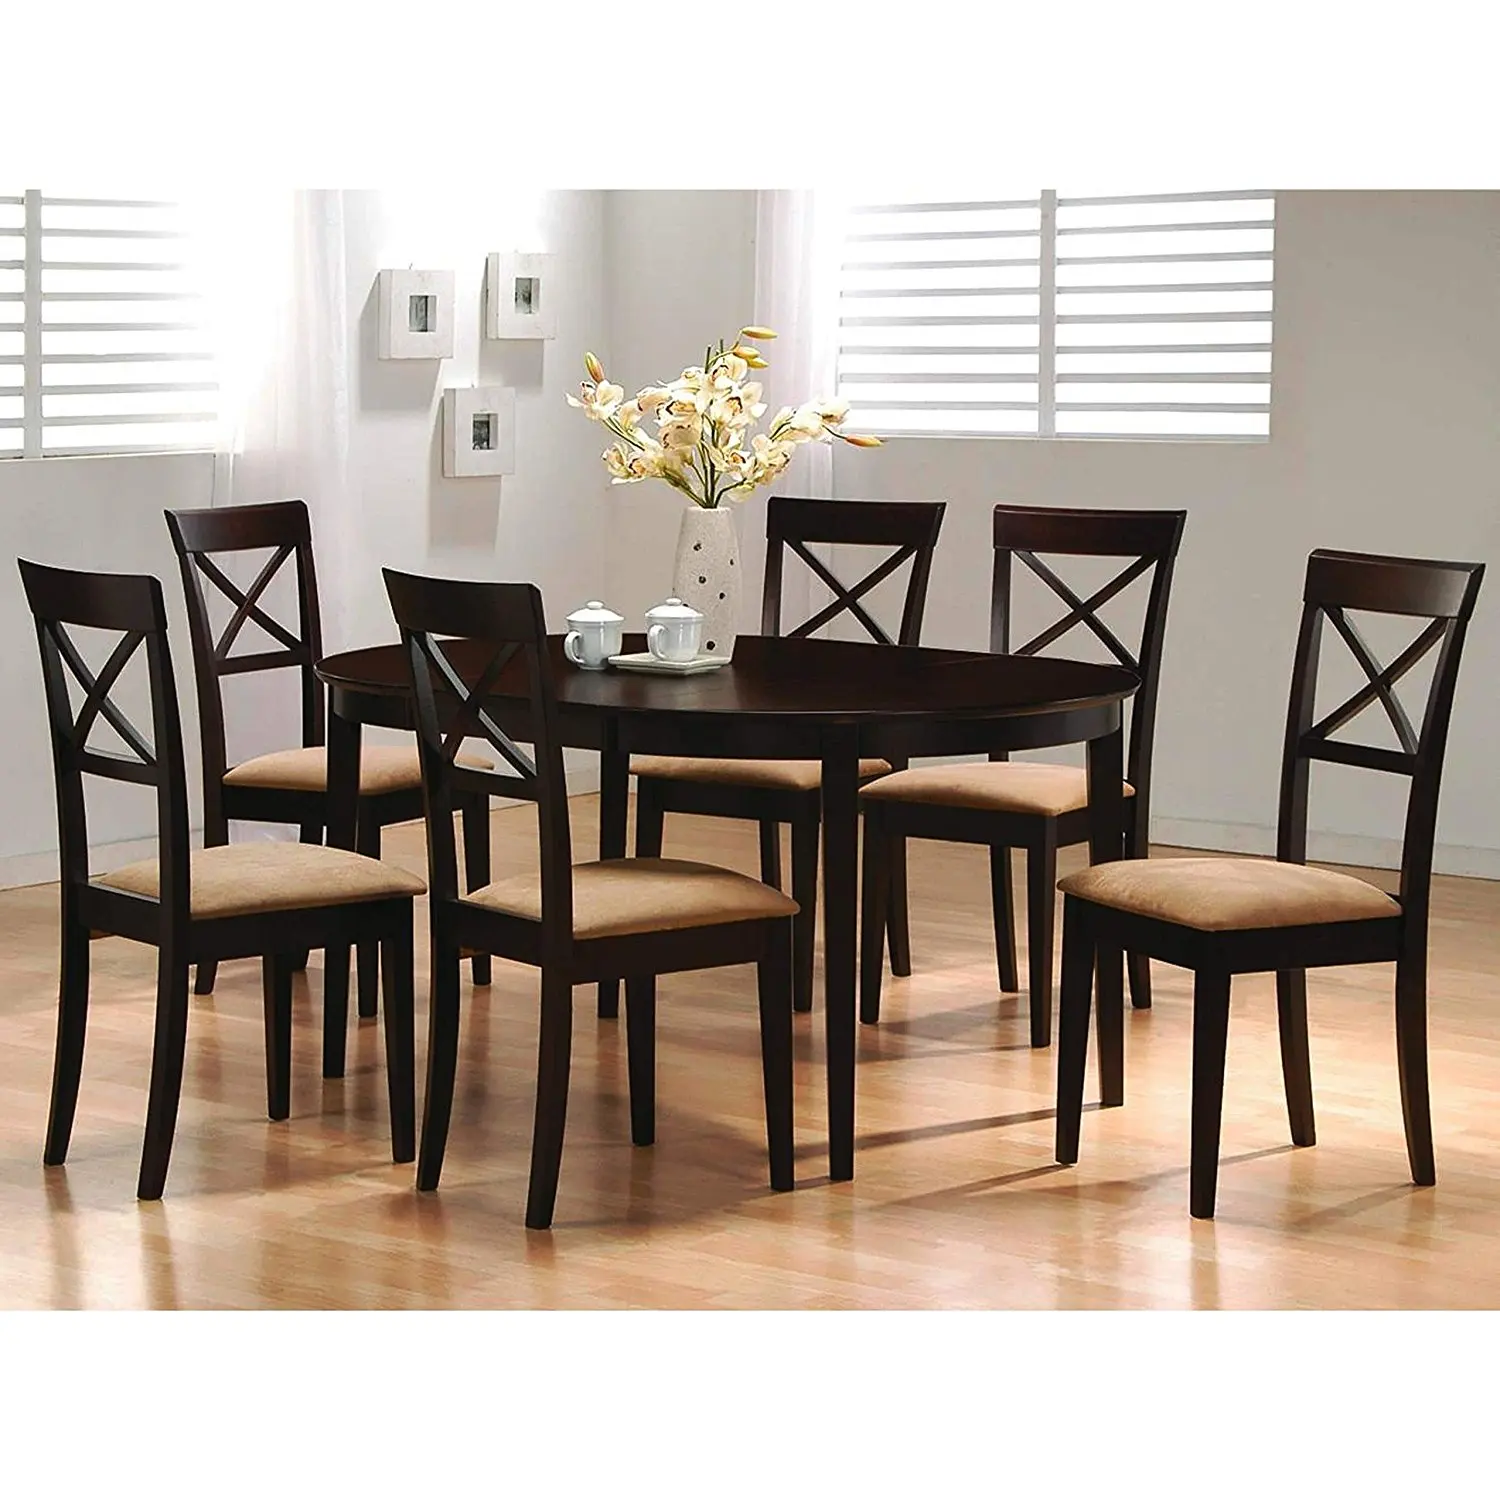 Minimalist Cheap Dining Table Sets Under 100 for Large Space